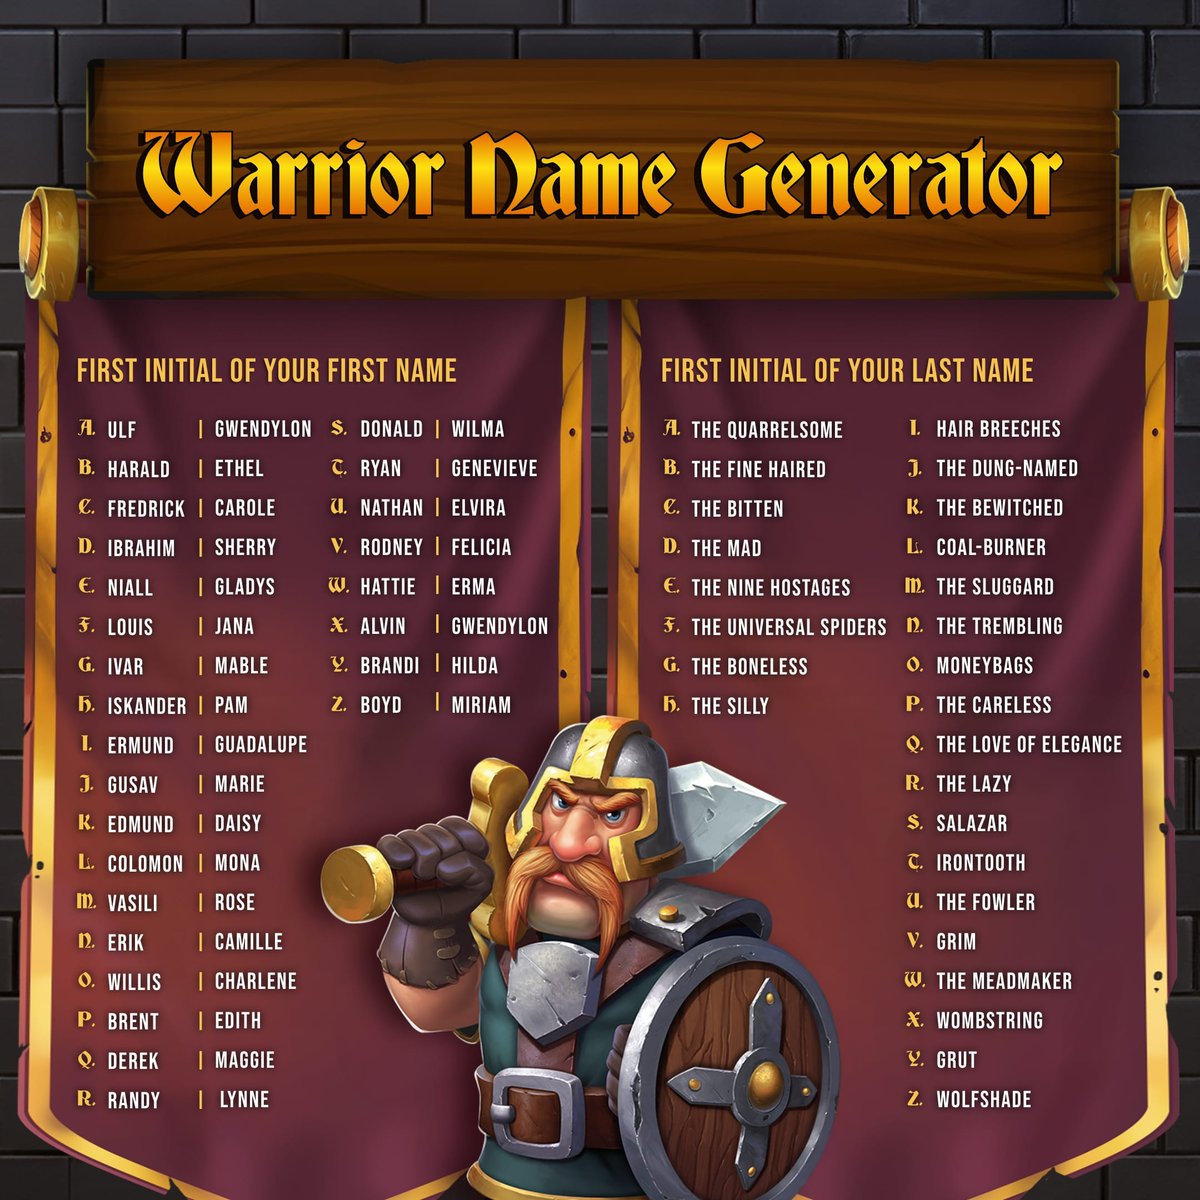 Unleash your inner Fortune Fortress warrior 💪🏰 What would your name and title be if you were a warrior in the medieval ages? Use our name generator and tell us in the comments below! #onlineslot #gaming #fortunefortress #casino